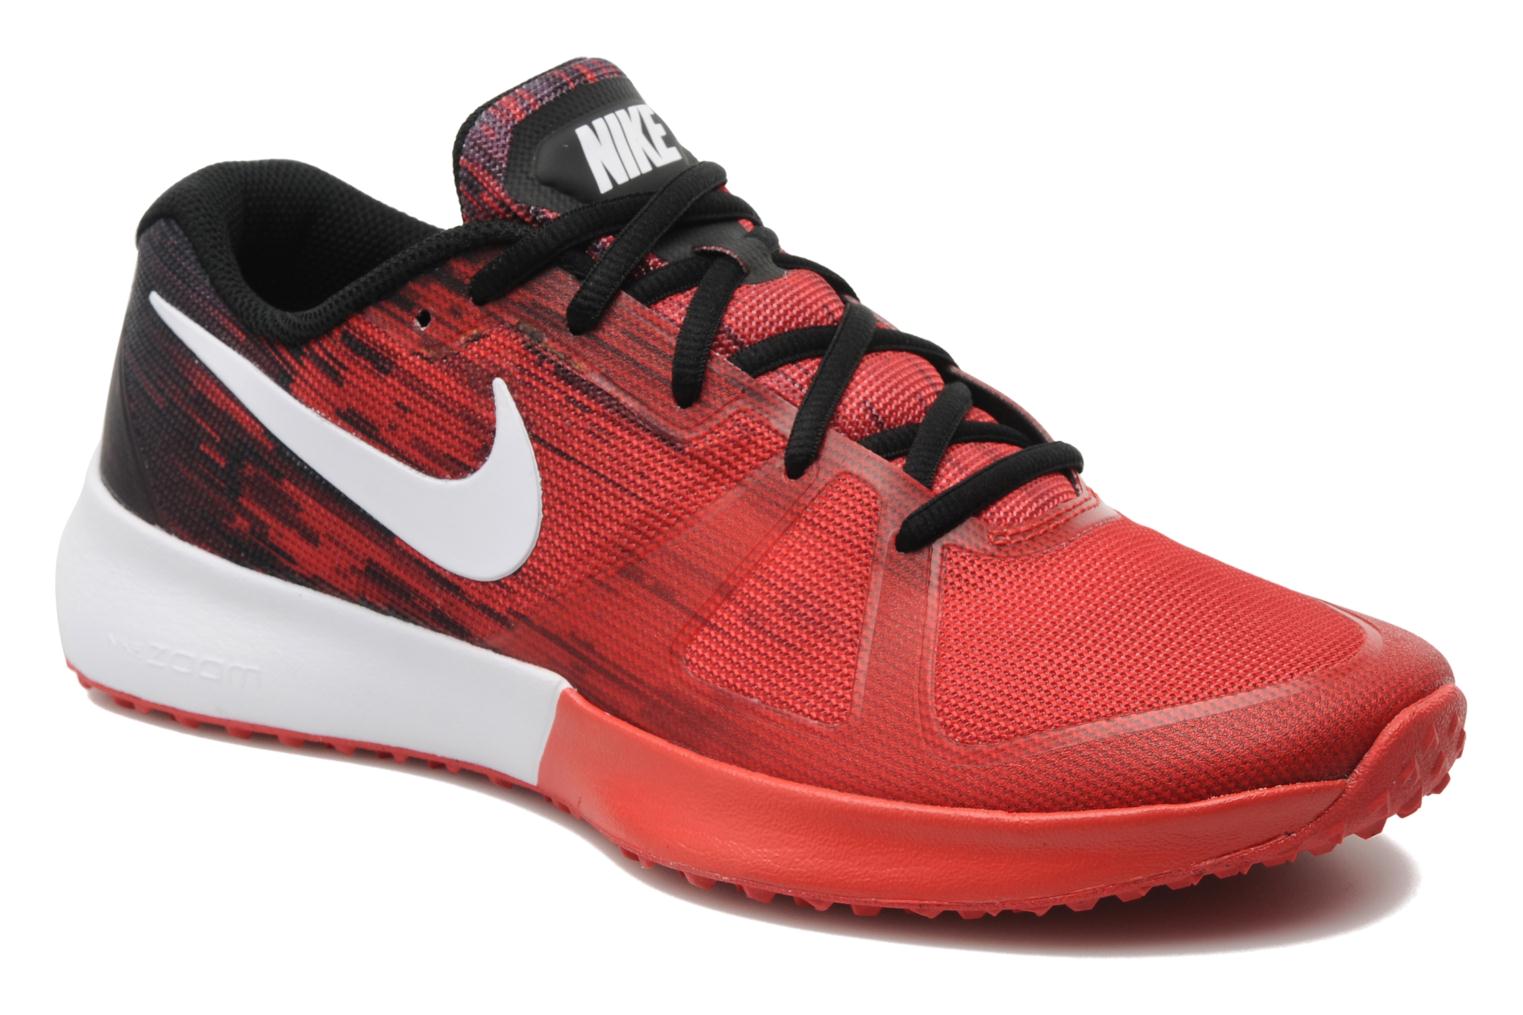 Nike Nike Zoom Speed Tr Sport shoes in Red at Sarenza.co.uk (182298)